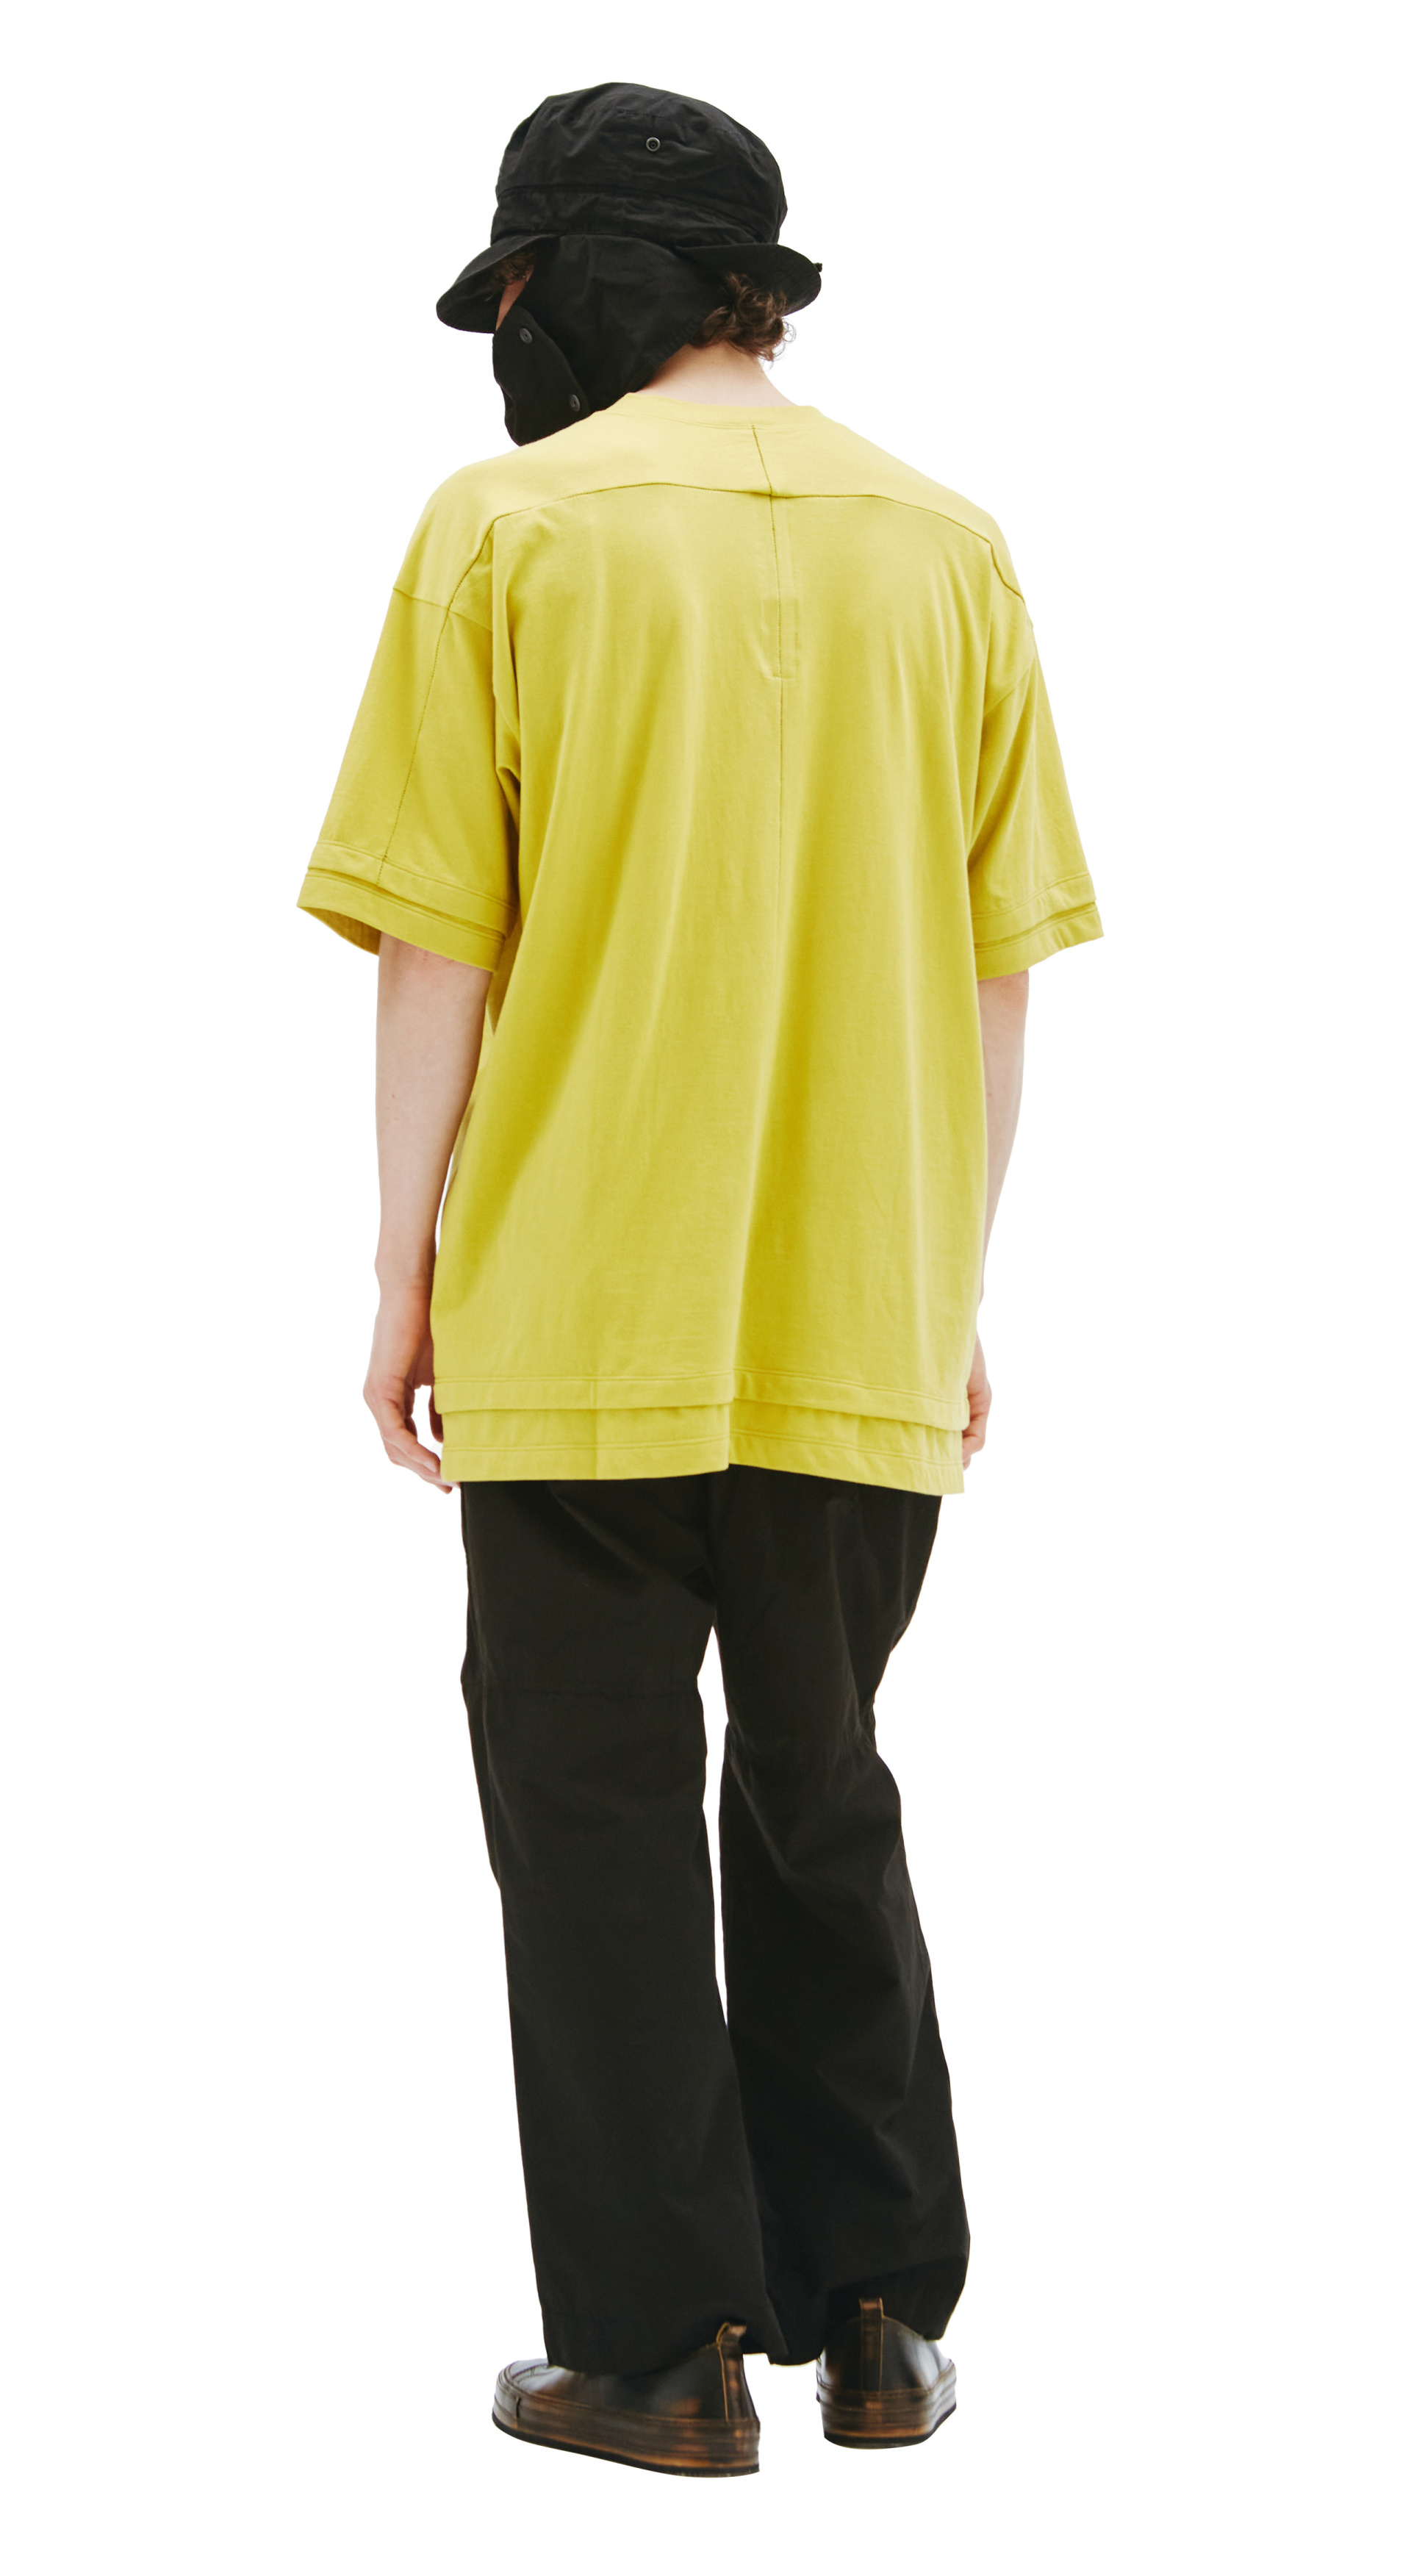 The Viridi-Anne Сotton t-shirt with patch pocket